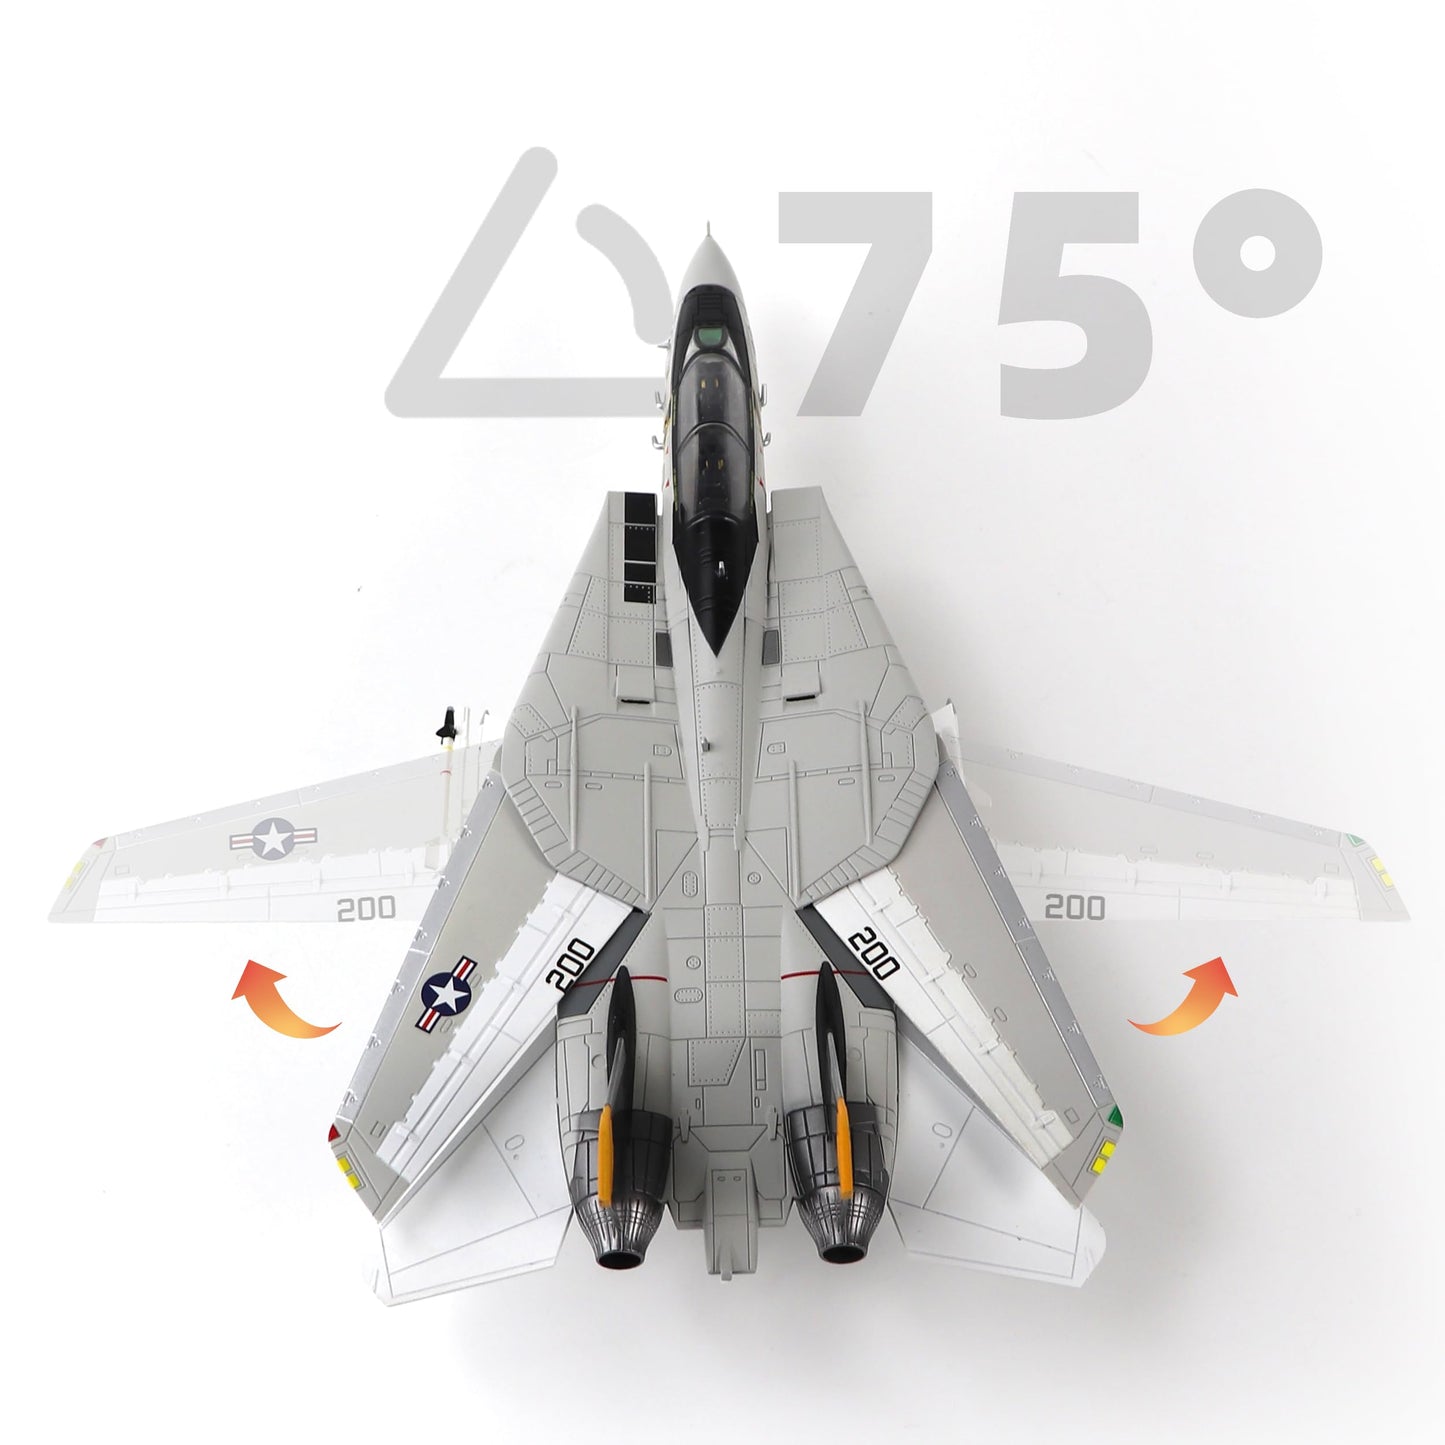 NUOTIE US Navy F-14 Tomcat 1/72 Alloy Model VF-84 Jolly Rogers Fighter DieCast Metal Airplane Military Display Model Collection or Gift